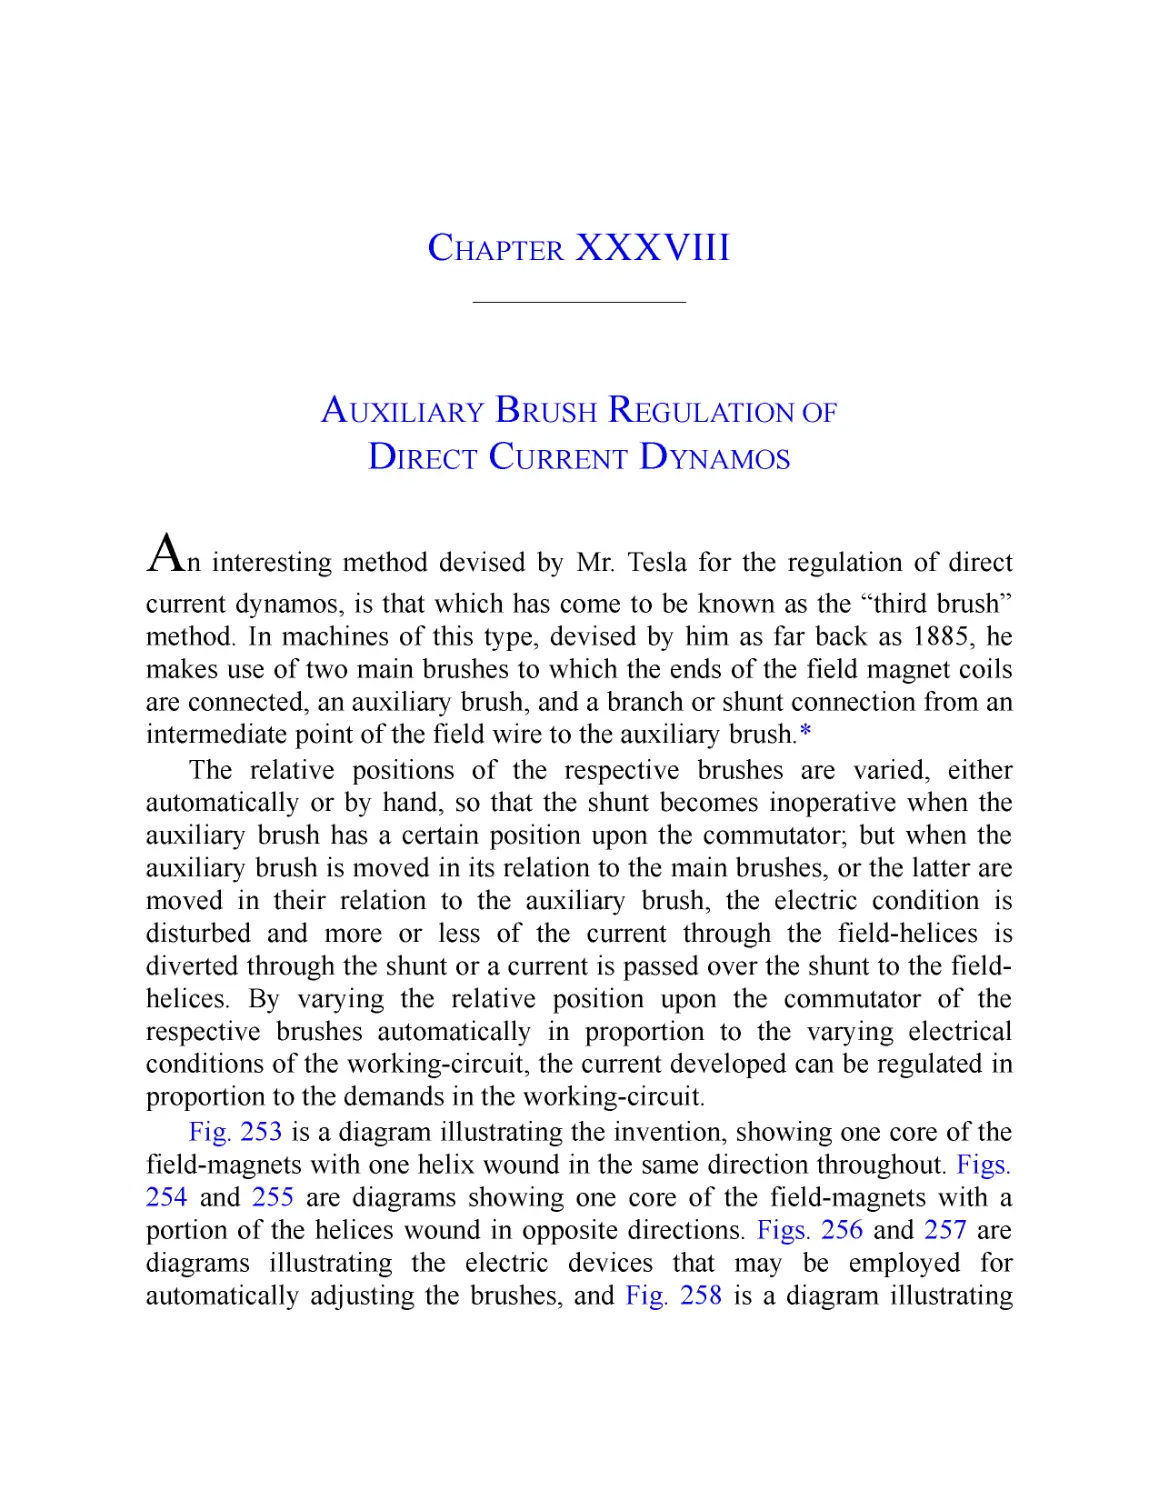 ﻿Chapter XXXVIII: Auxiliary Brush Regulation of Direct Current Dynamo